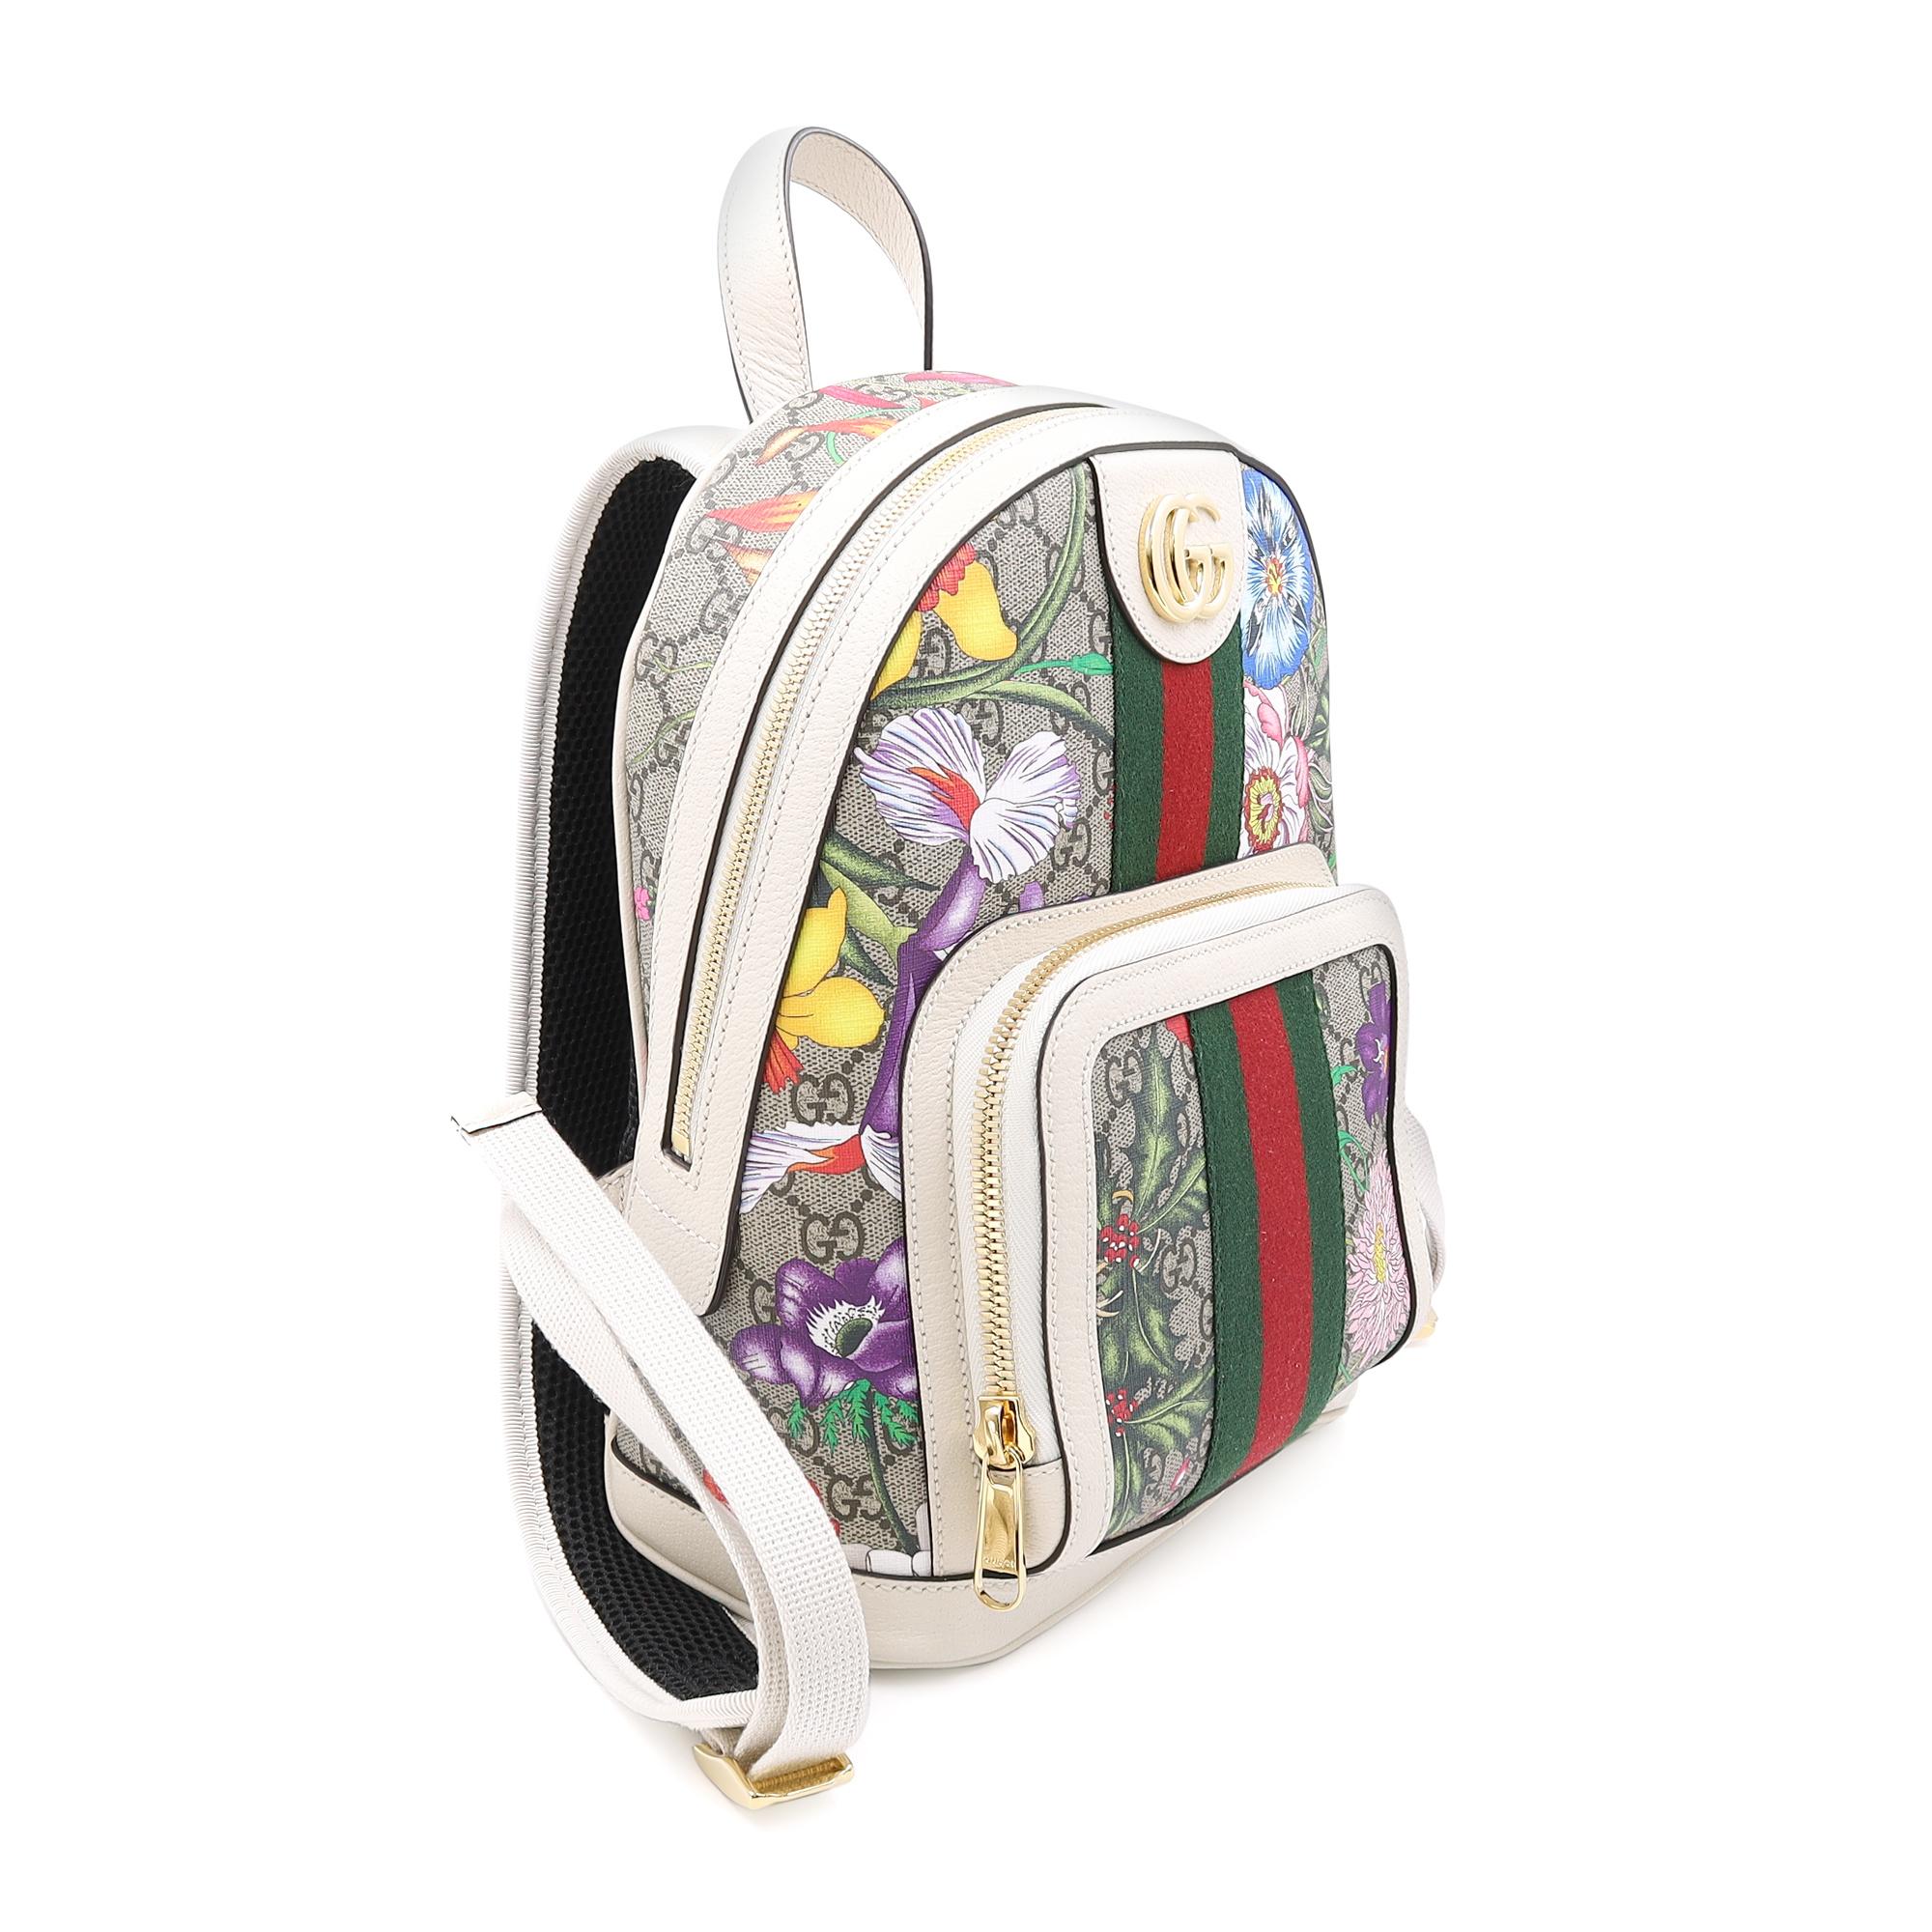 Gucci Ophidia small white ladies backpack featuring GG supreme canvas with multicolor floral motifs and double GG gold tone logo hardware on the front. Comes with a small front zip pocket and main zip around compartment with multiple interior card